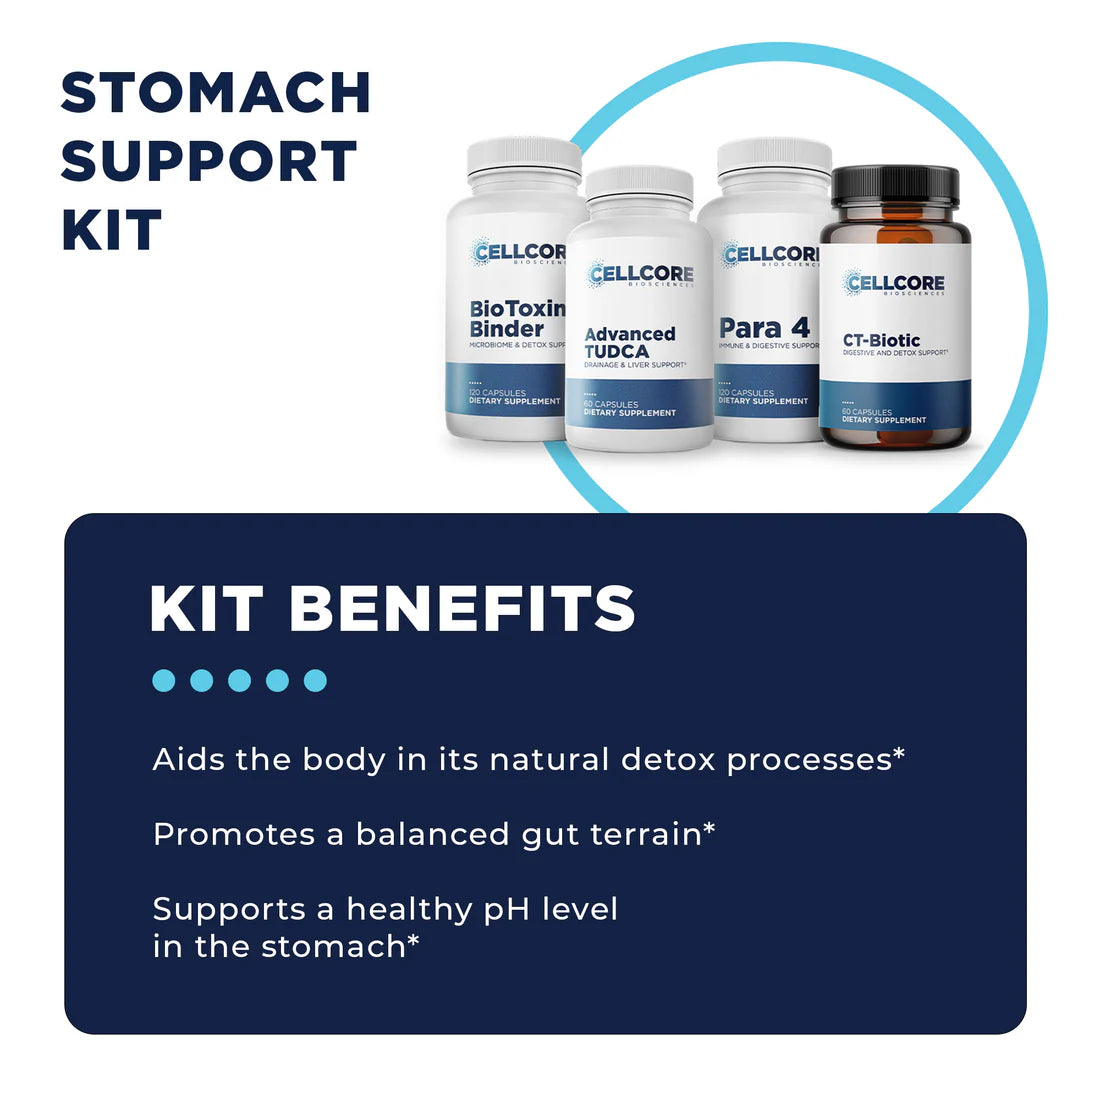 Stomach Support Protocol